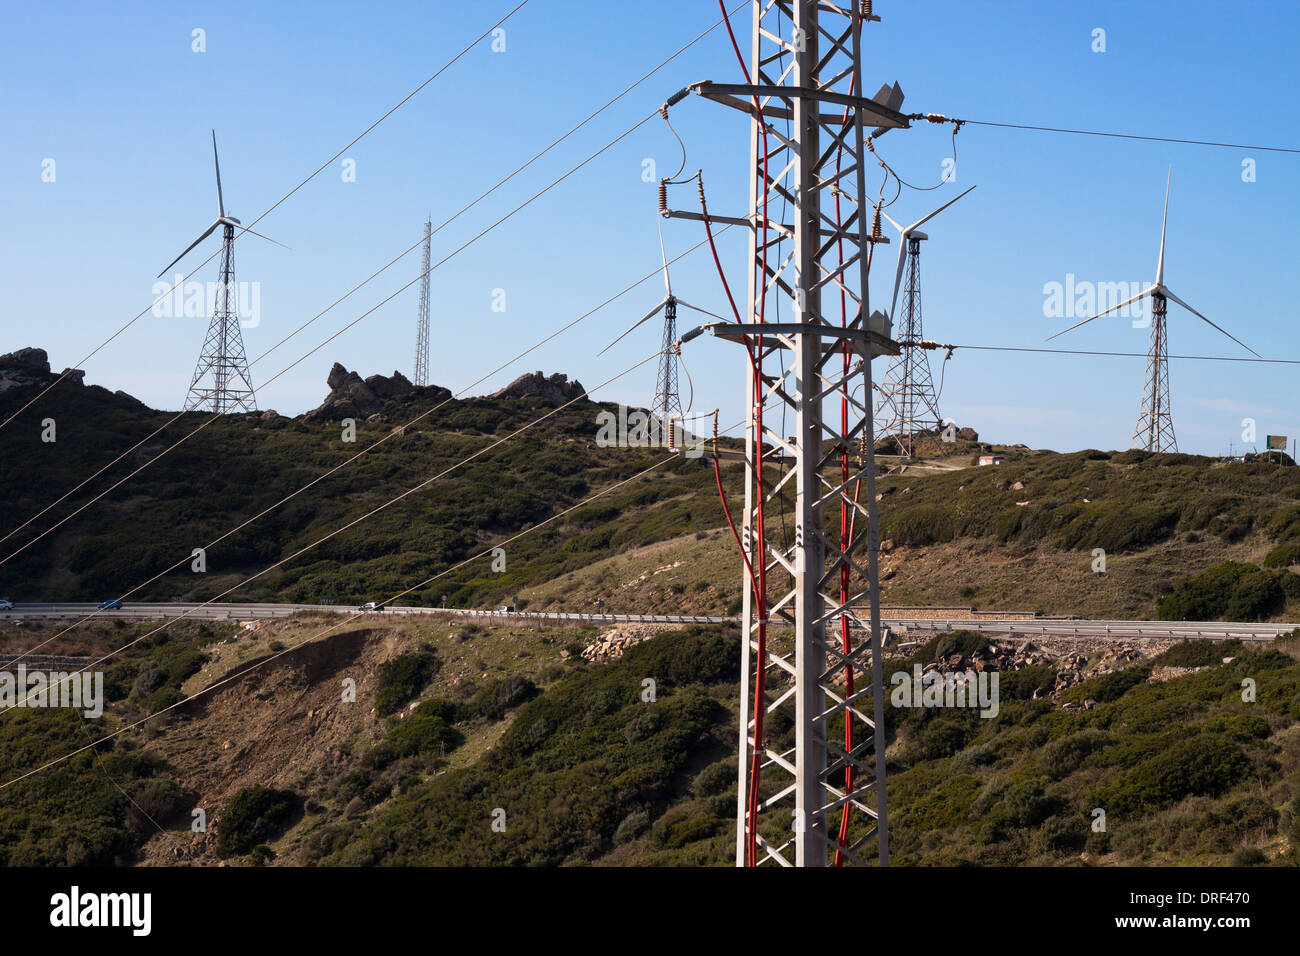 Green hills with electricity poles and wind turbines. Tarifa, Cadiz, Andalusia, Spain. Stock Photo